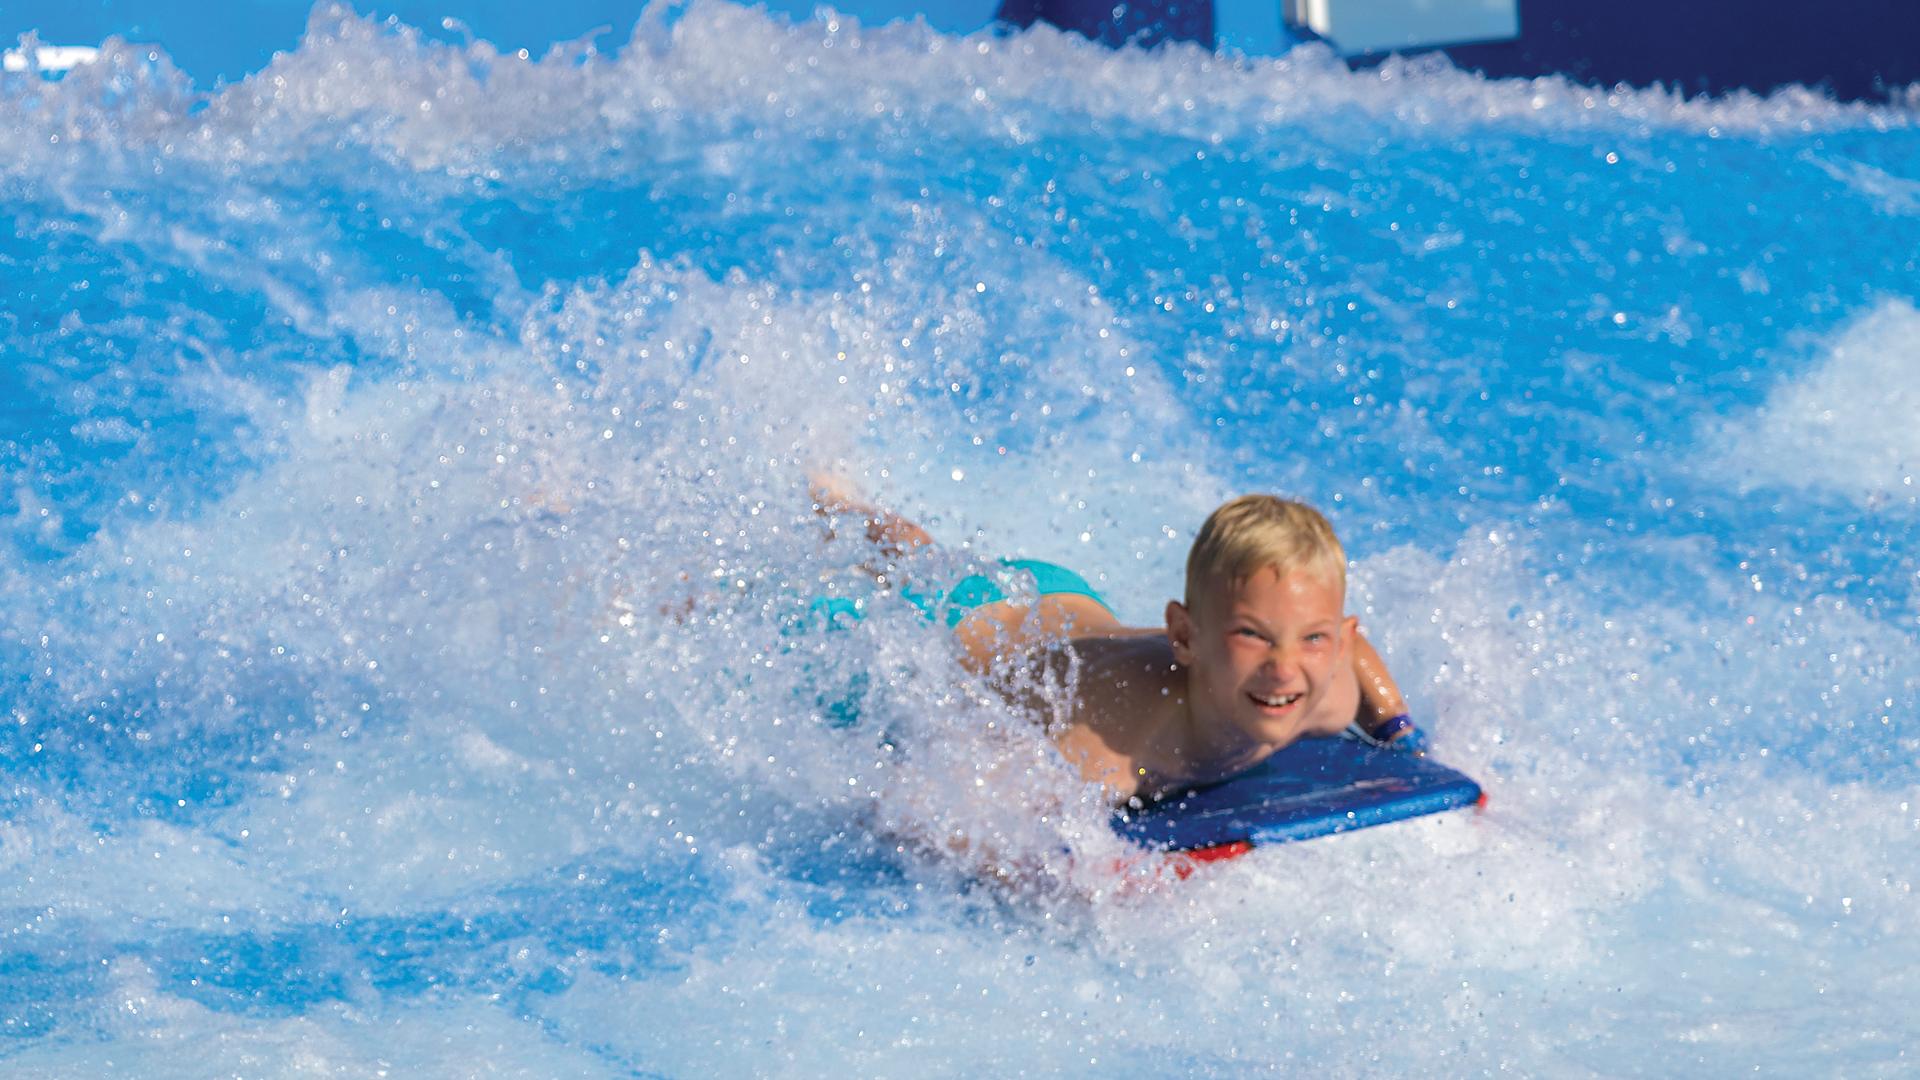 harmony-of-the-seas-flowrider-boy-body-surfing-laughing